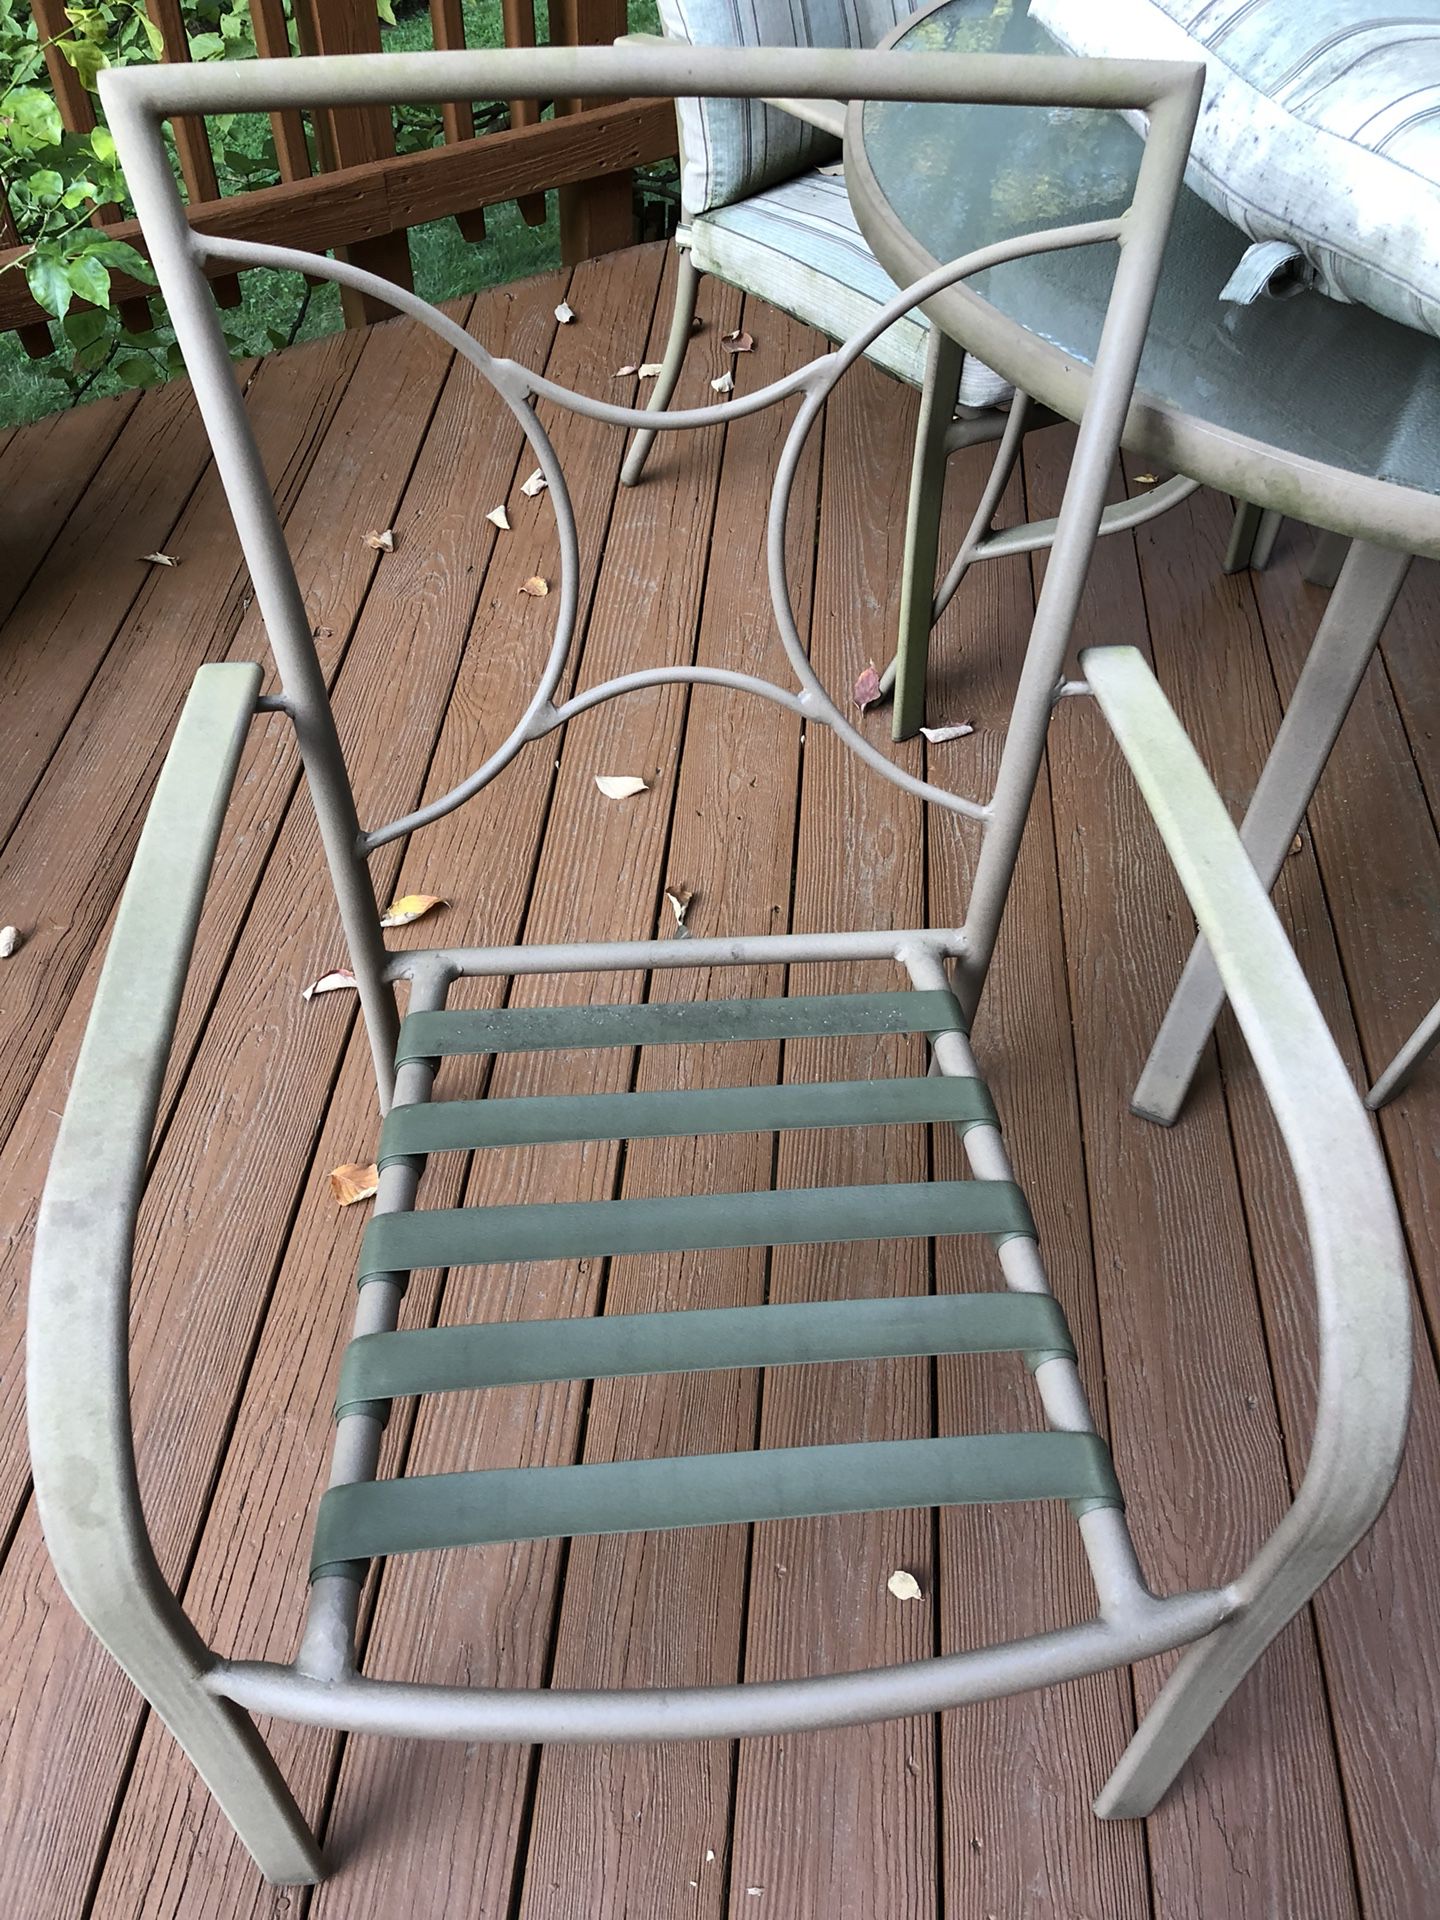 Patio table and 4 chair set. Pillows not in a great shape.